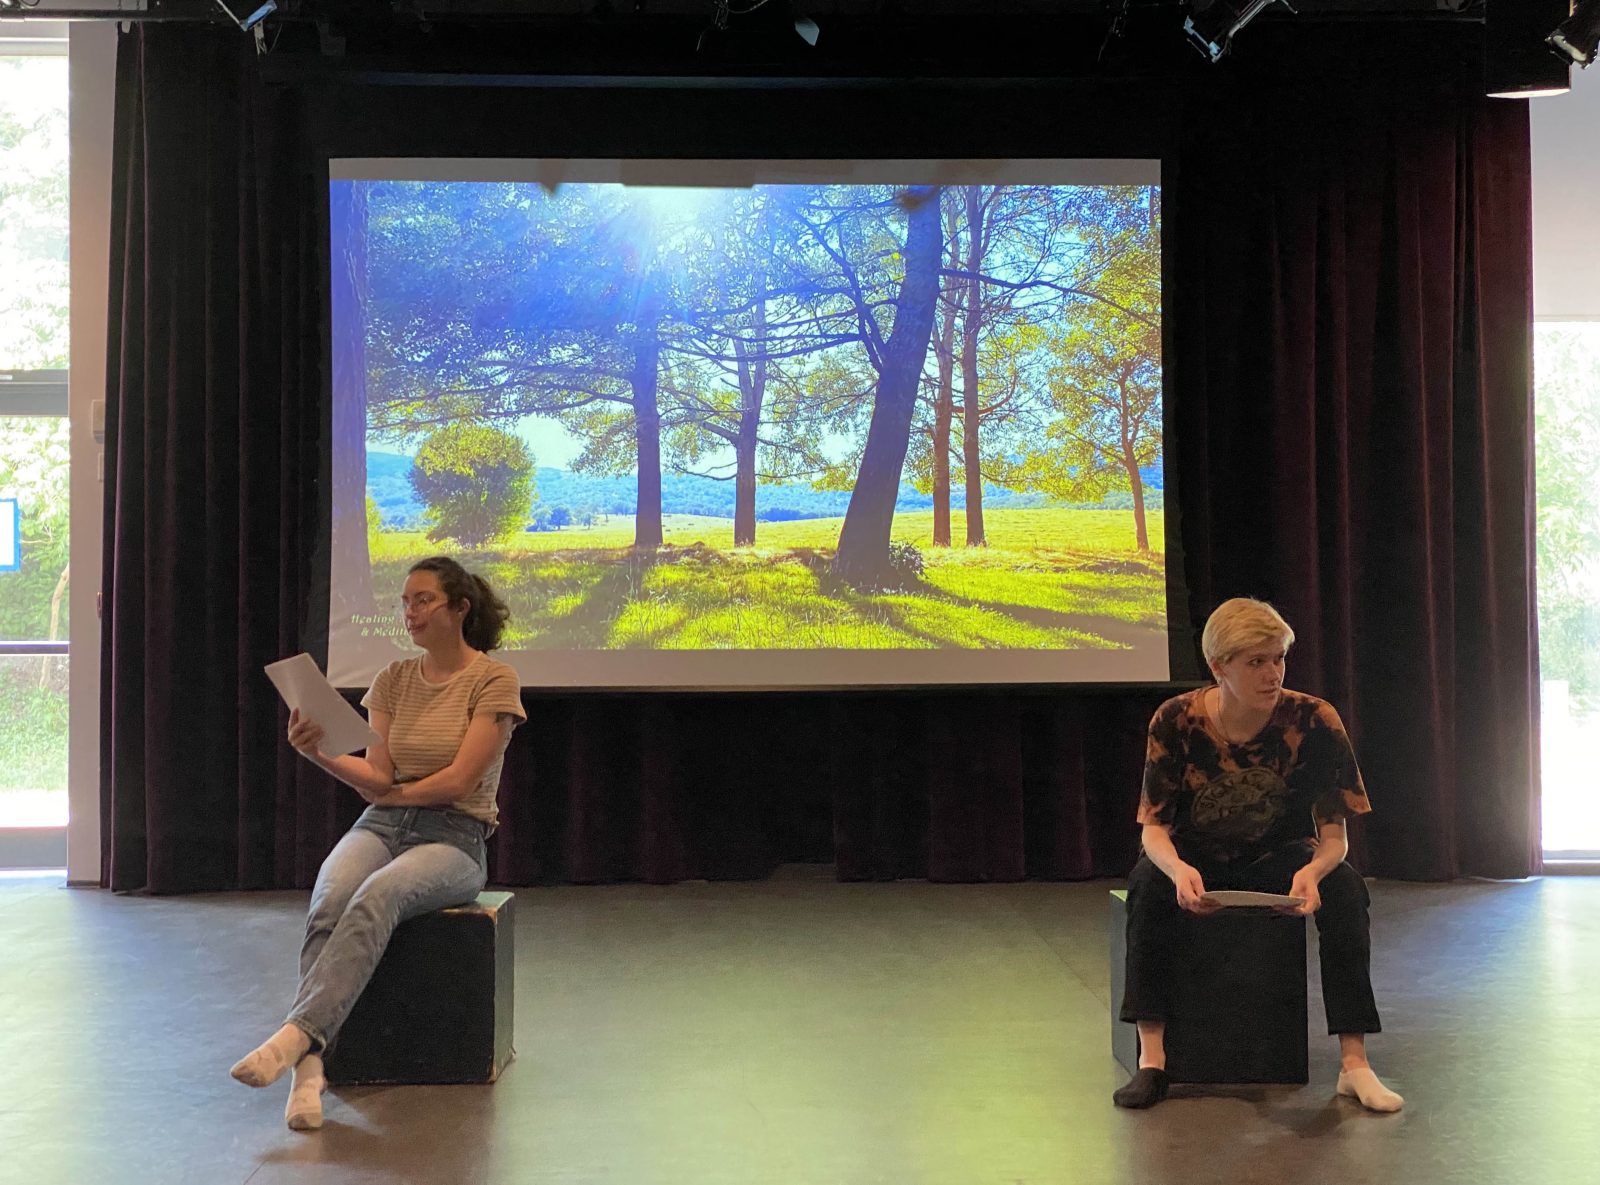 Two students in street clothing sit in a dramatic arts studio with a backdrop image of two large trees on a sunny day behind them. The students are engaged with a script during a workshop session.